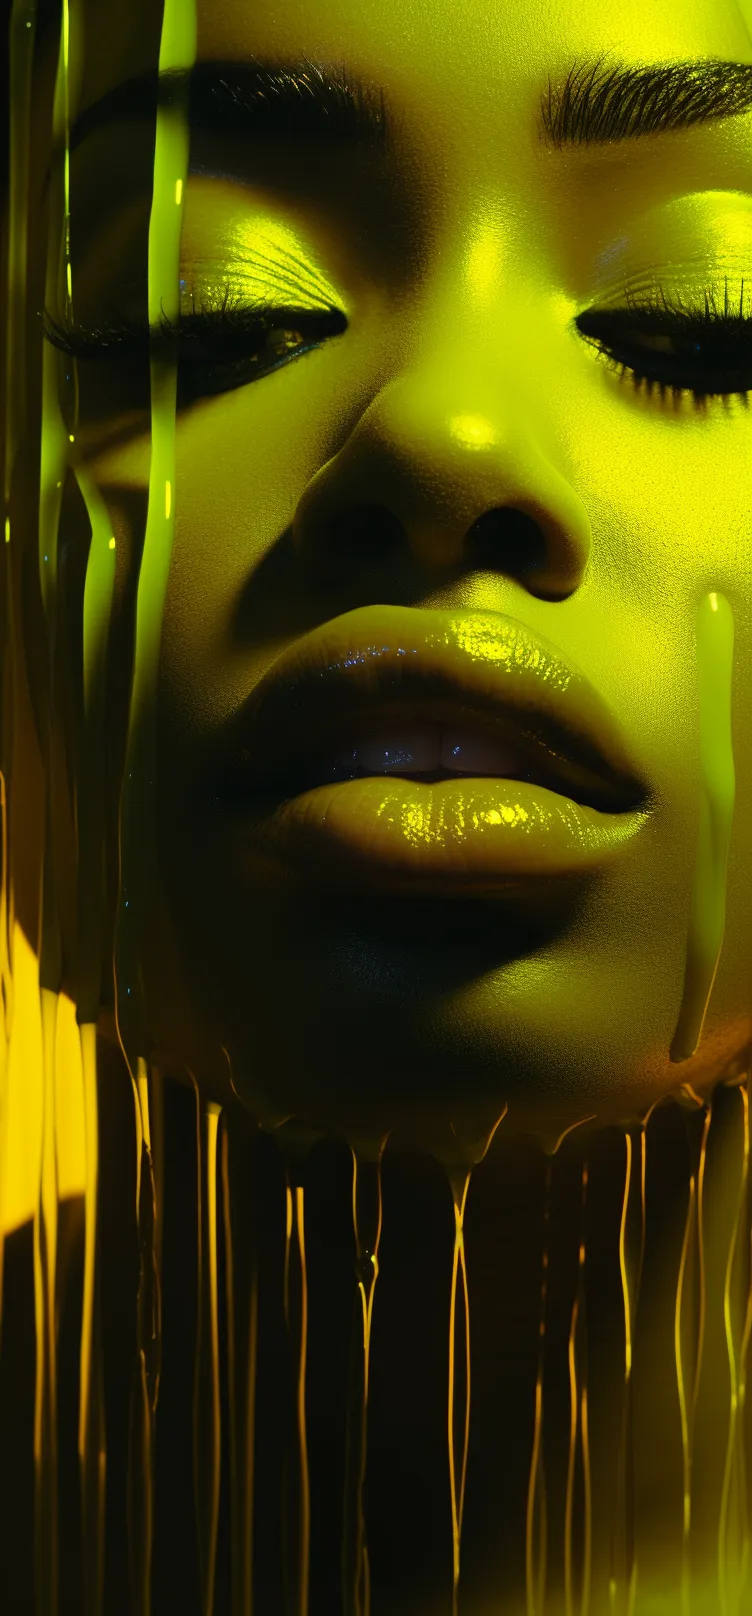 Woman's Face Close Up Illuminated In Vibrant Yellow And Green Hues With Dripping Effect